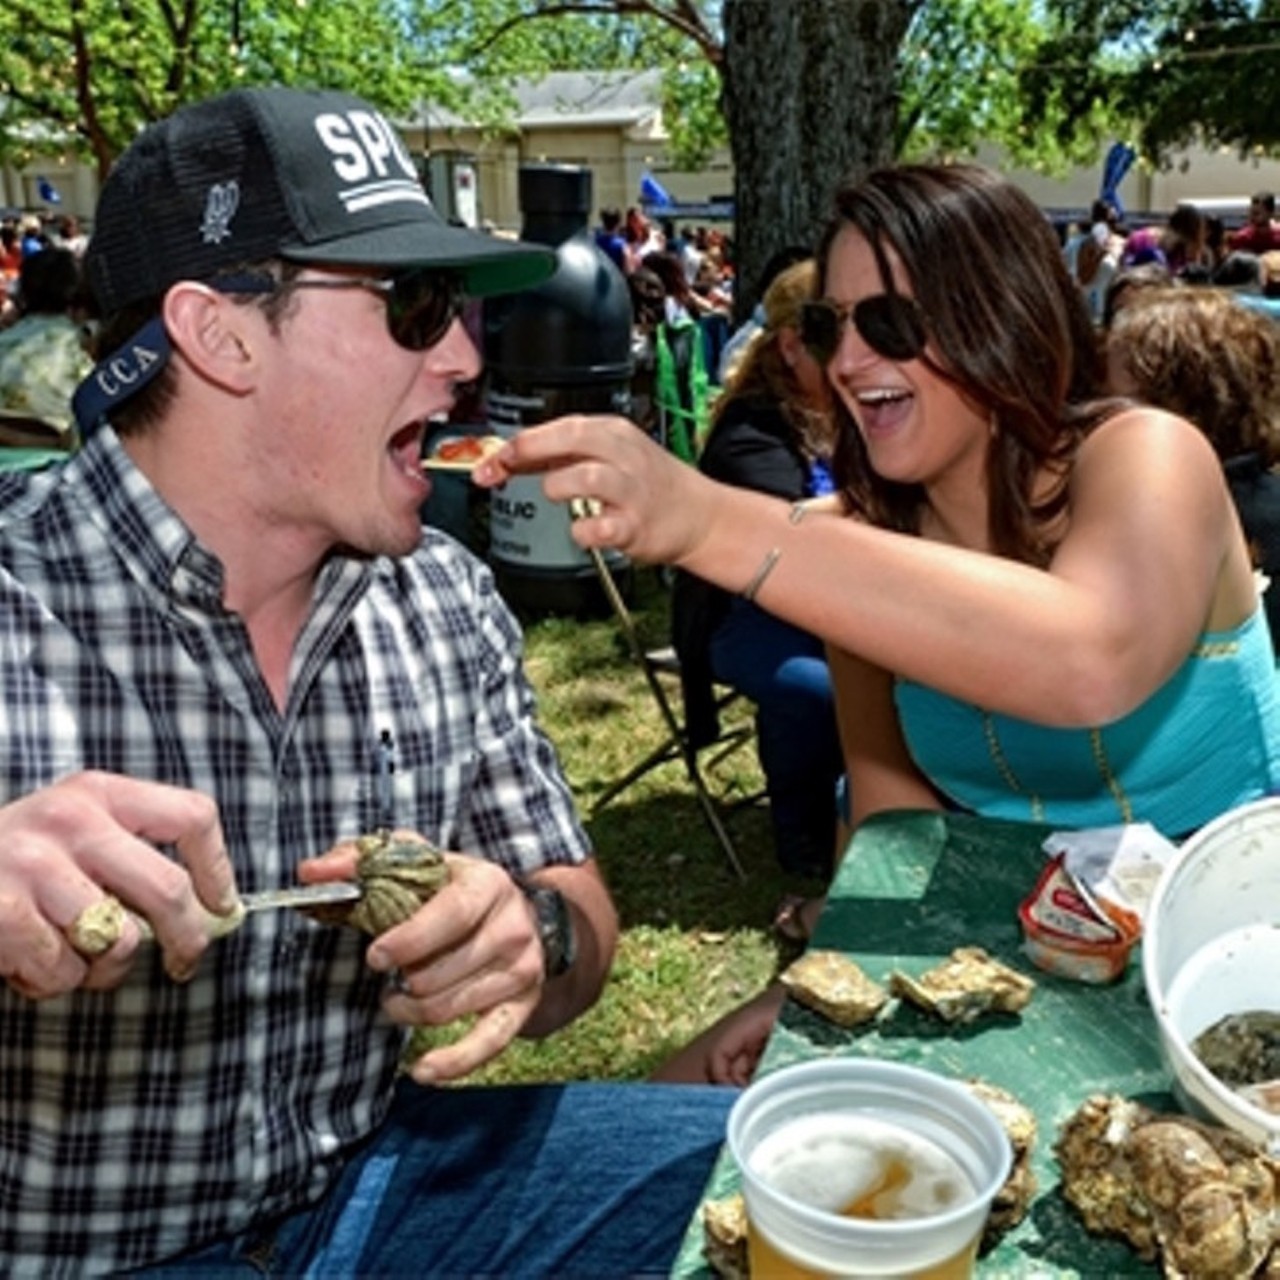 Oyster Bake 
5-11 p.m. April 21-22, at St. Mary&#146;s University
St. Mary's University Campus 2017 is the destination Fiesta Oyster Bake's 101st Anniversary. The event features more than 100,000 oysters served baked, raw and fried plus 70+ food and beverage booths that dish up savory favorites and quench every thirst. Enjoy continuous Rock, Country, Tejano, R&B / Hip Hop, Pop and Children's musical entertainment, as well as a full carnival and a special Fireworks Spectacular on Friday evening. Tickets Available for Purchase at The Fiesta Store. 
Photo by Fiesta SATaste of New Orleans